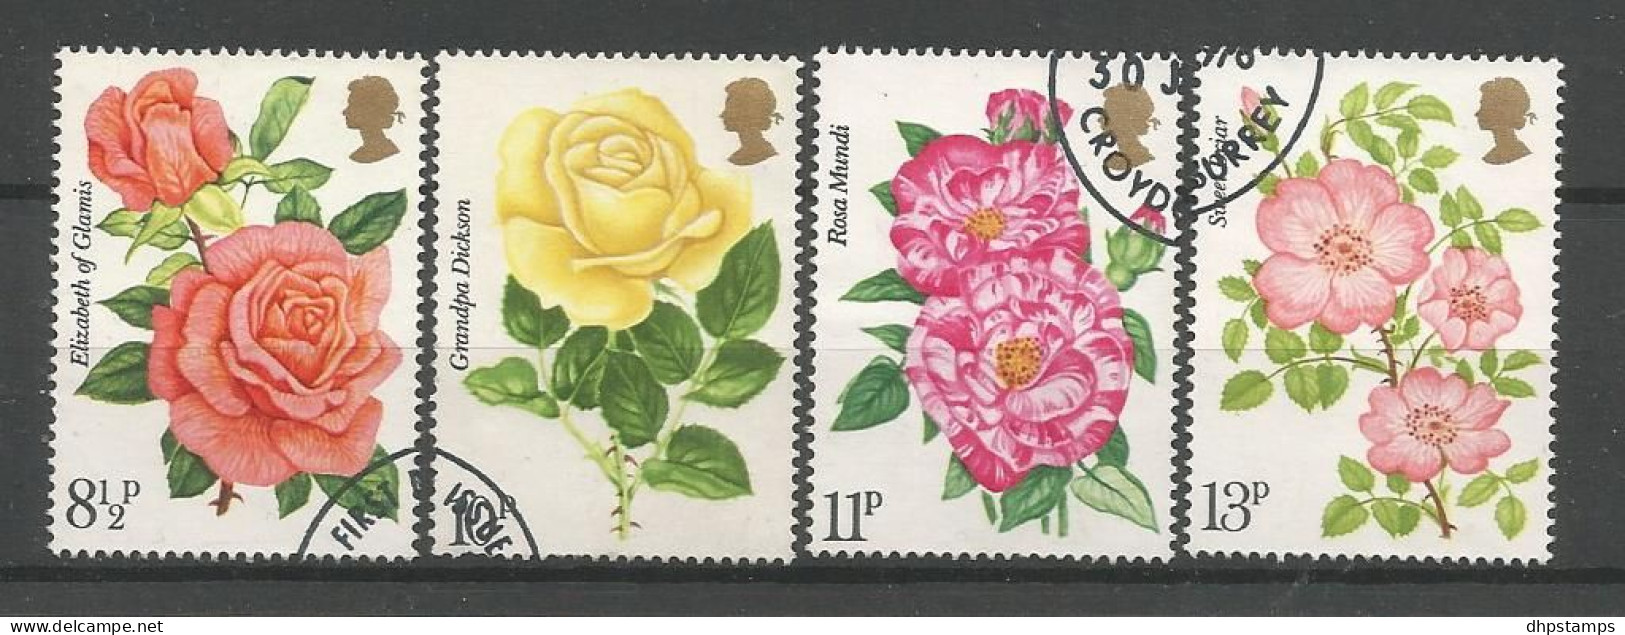 Gr. Britain 1976 Roses Y.T. 795/798 (0) - Used Stamps